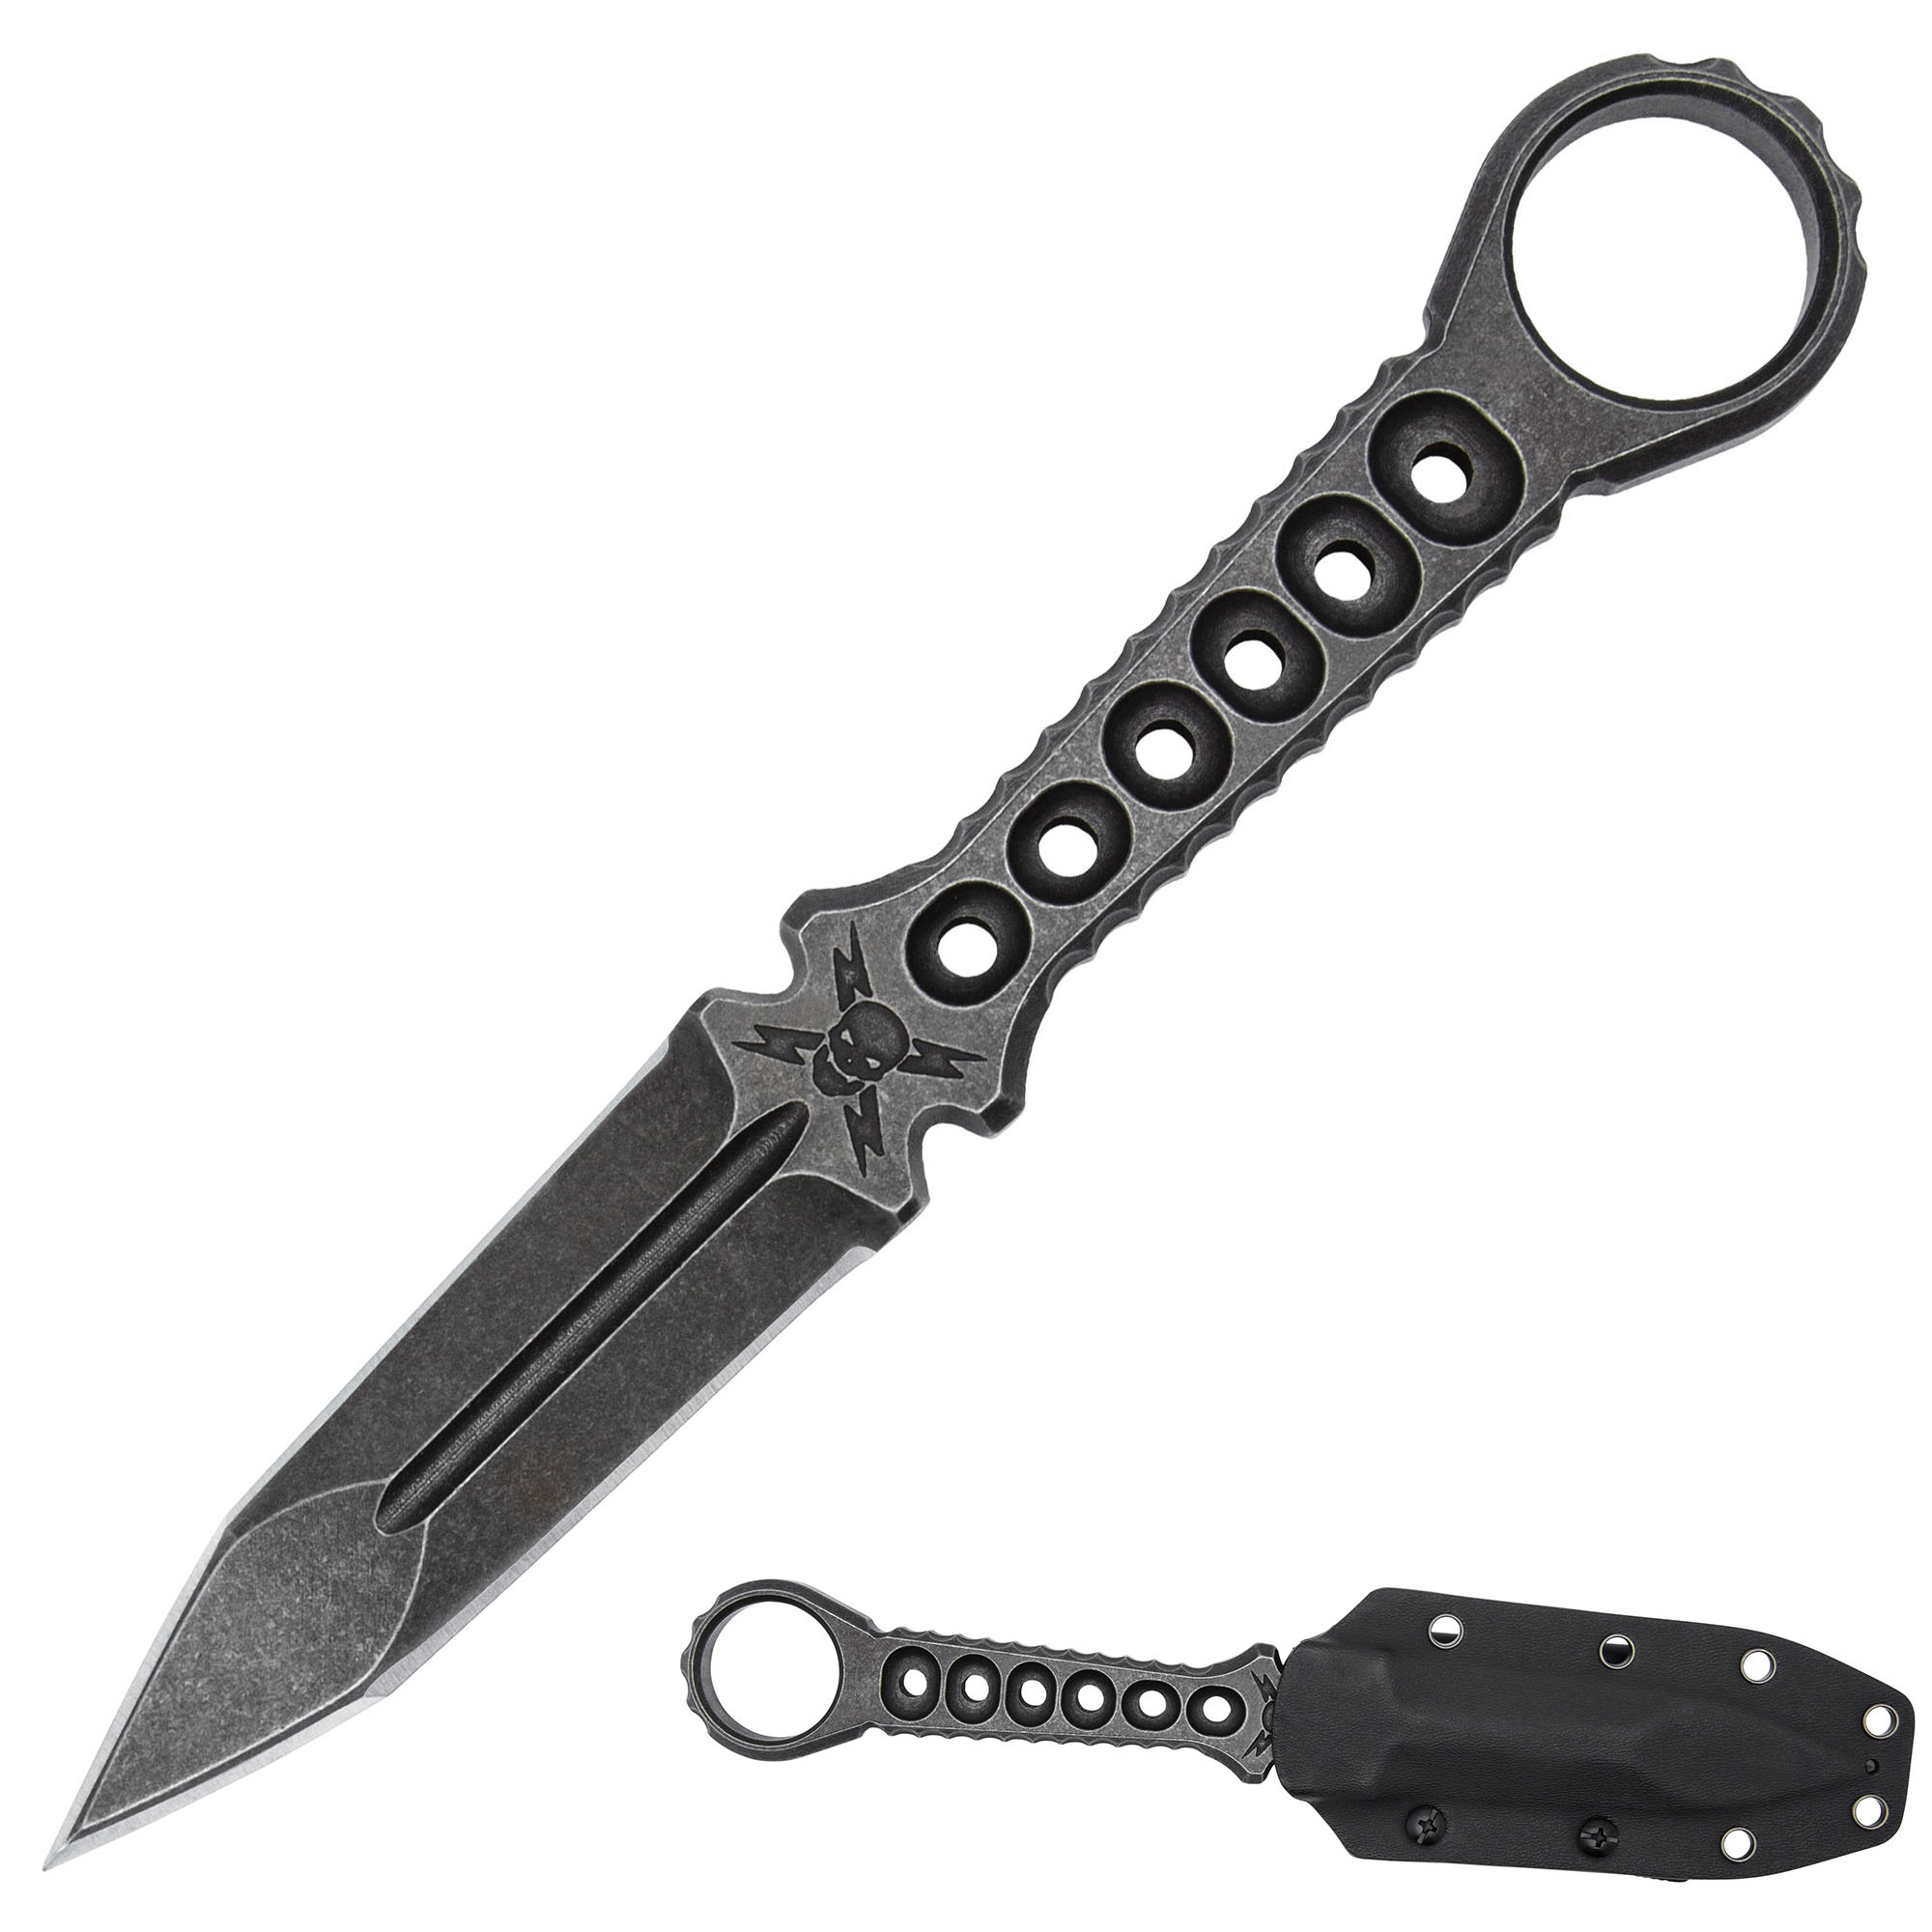 M48 OPS Tanker Combat Dagger with Sheath